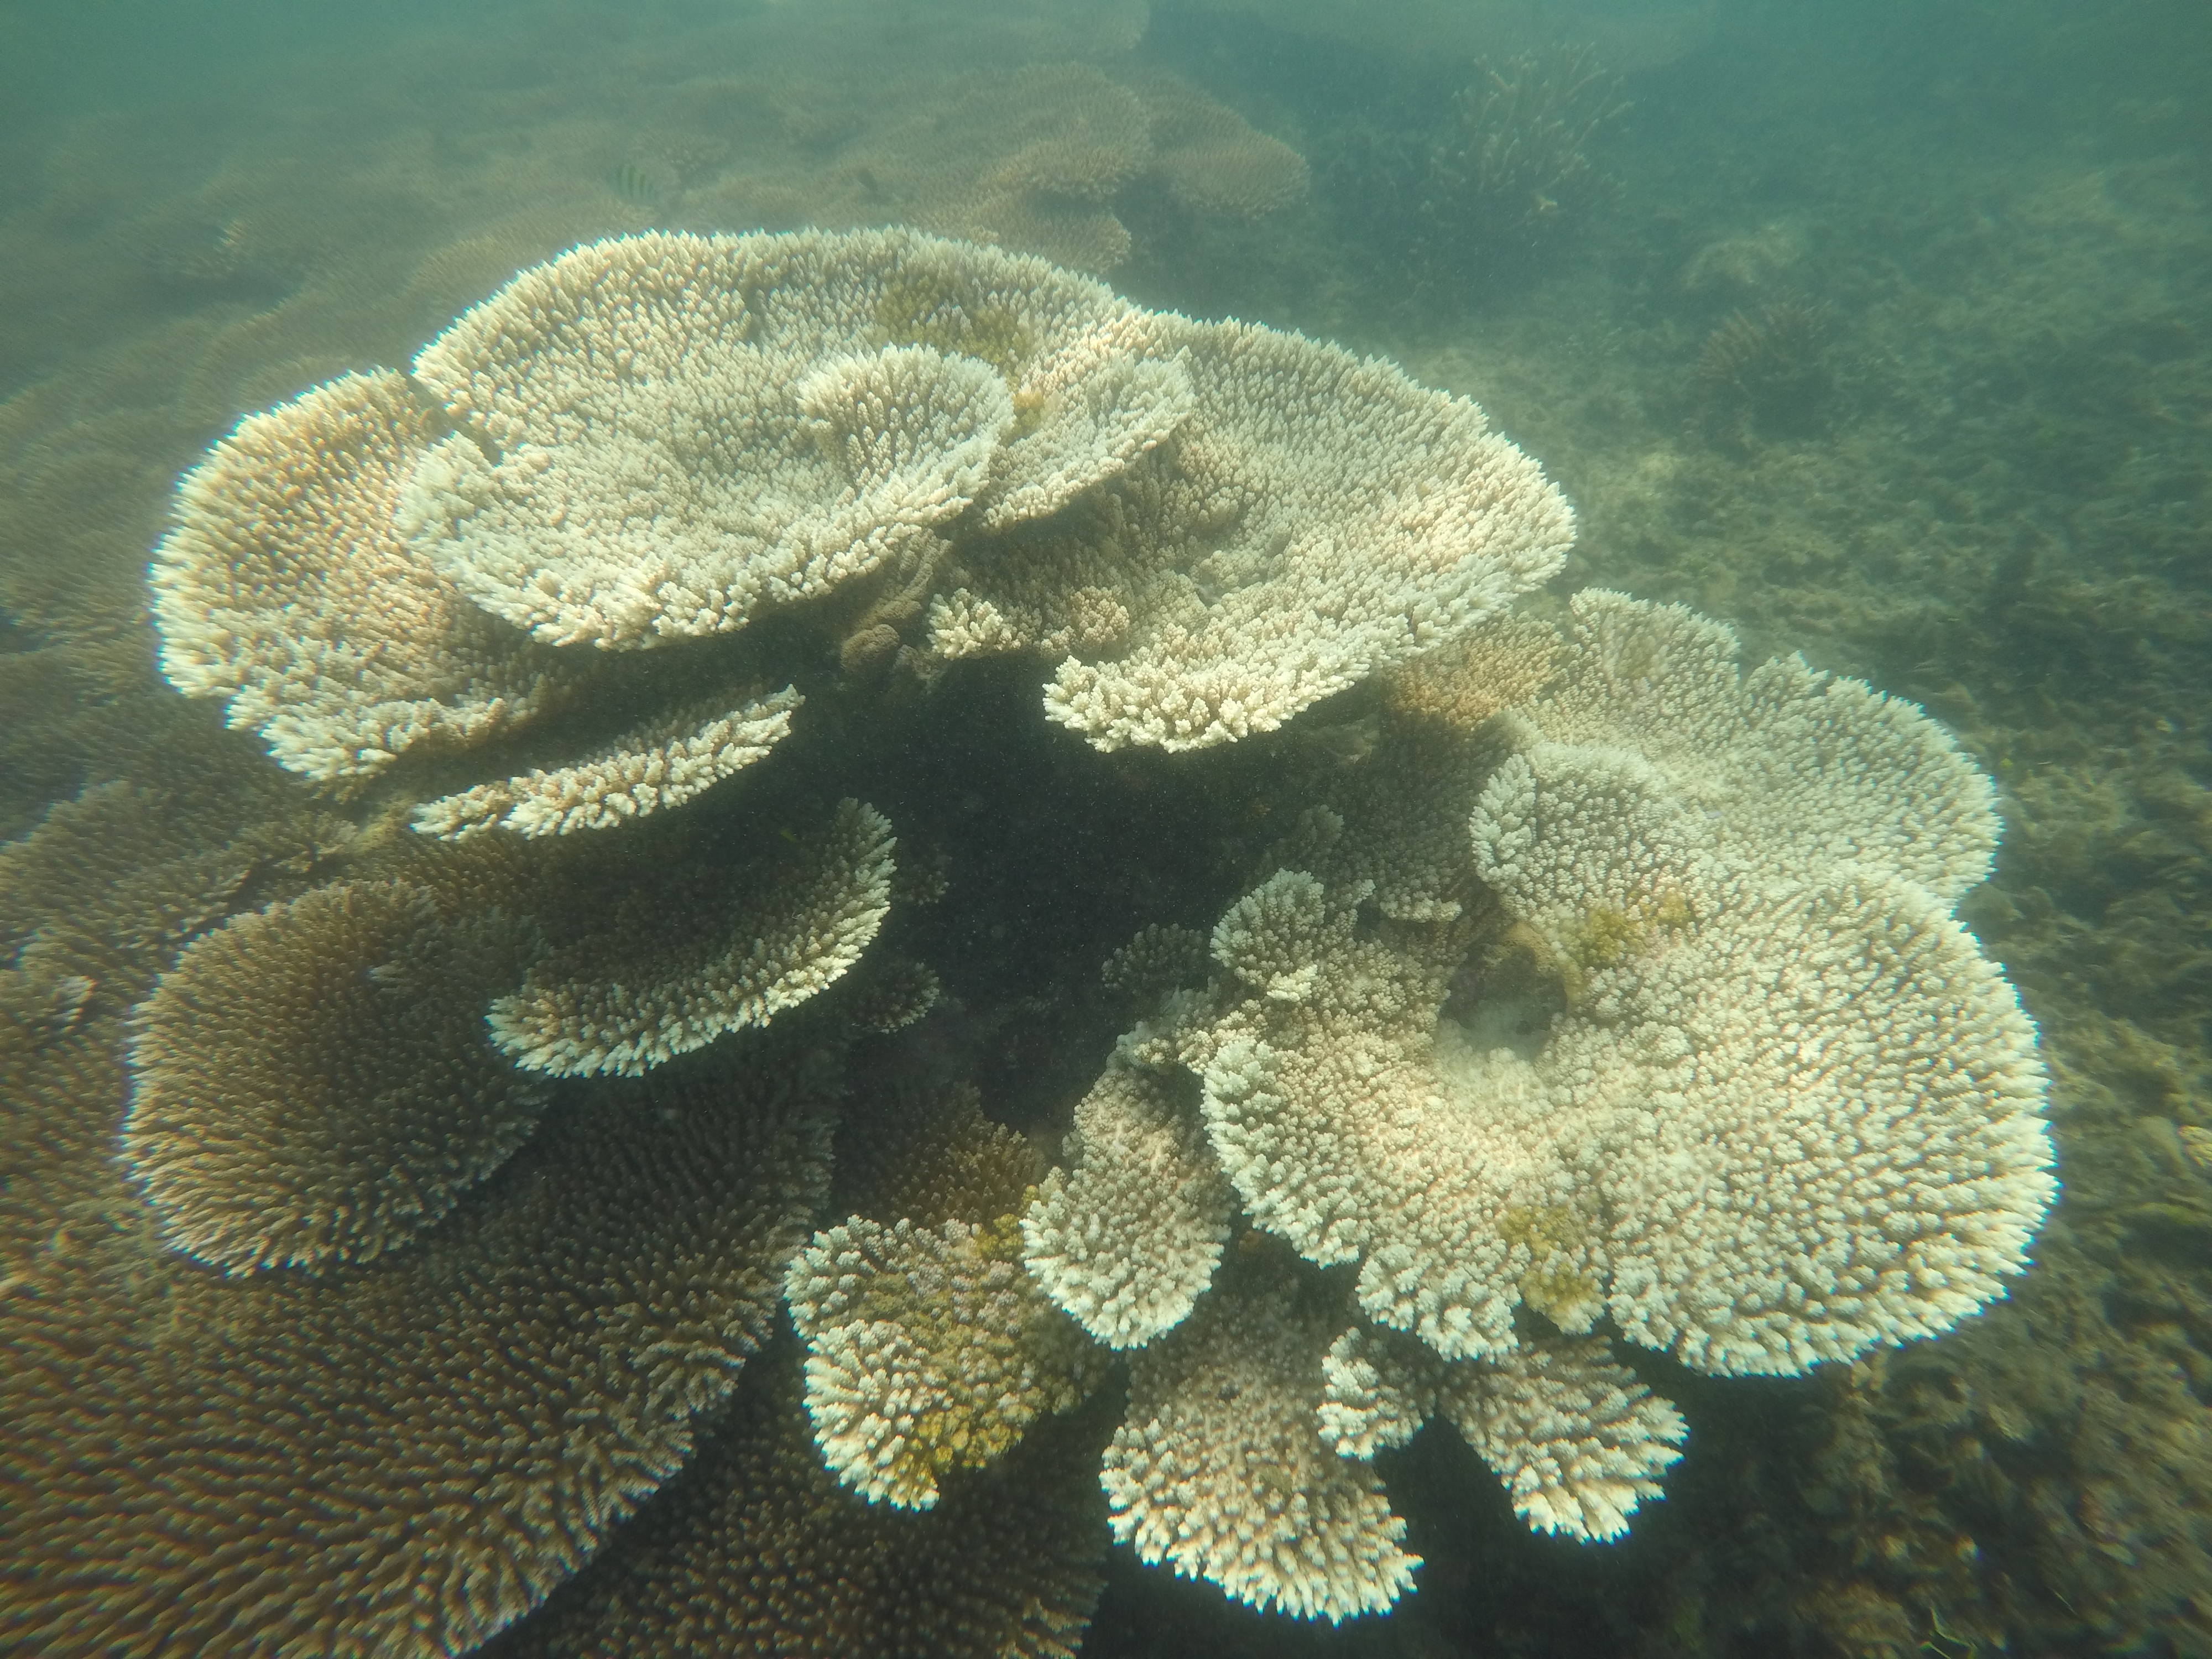 Coral Acropora Cytherea. (Pic courtesy: ISW)